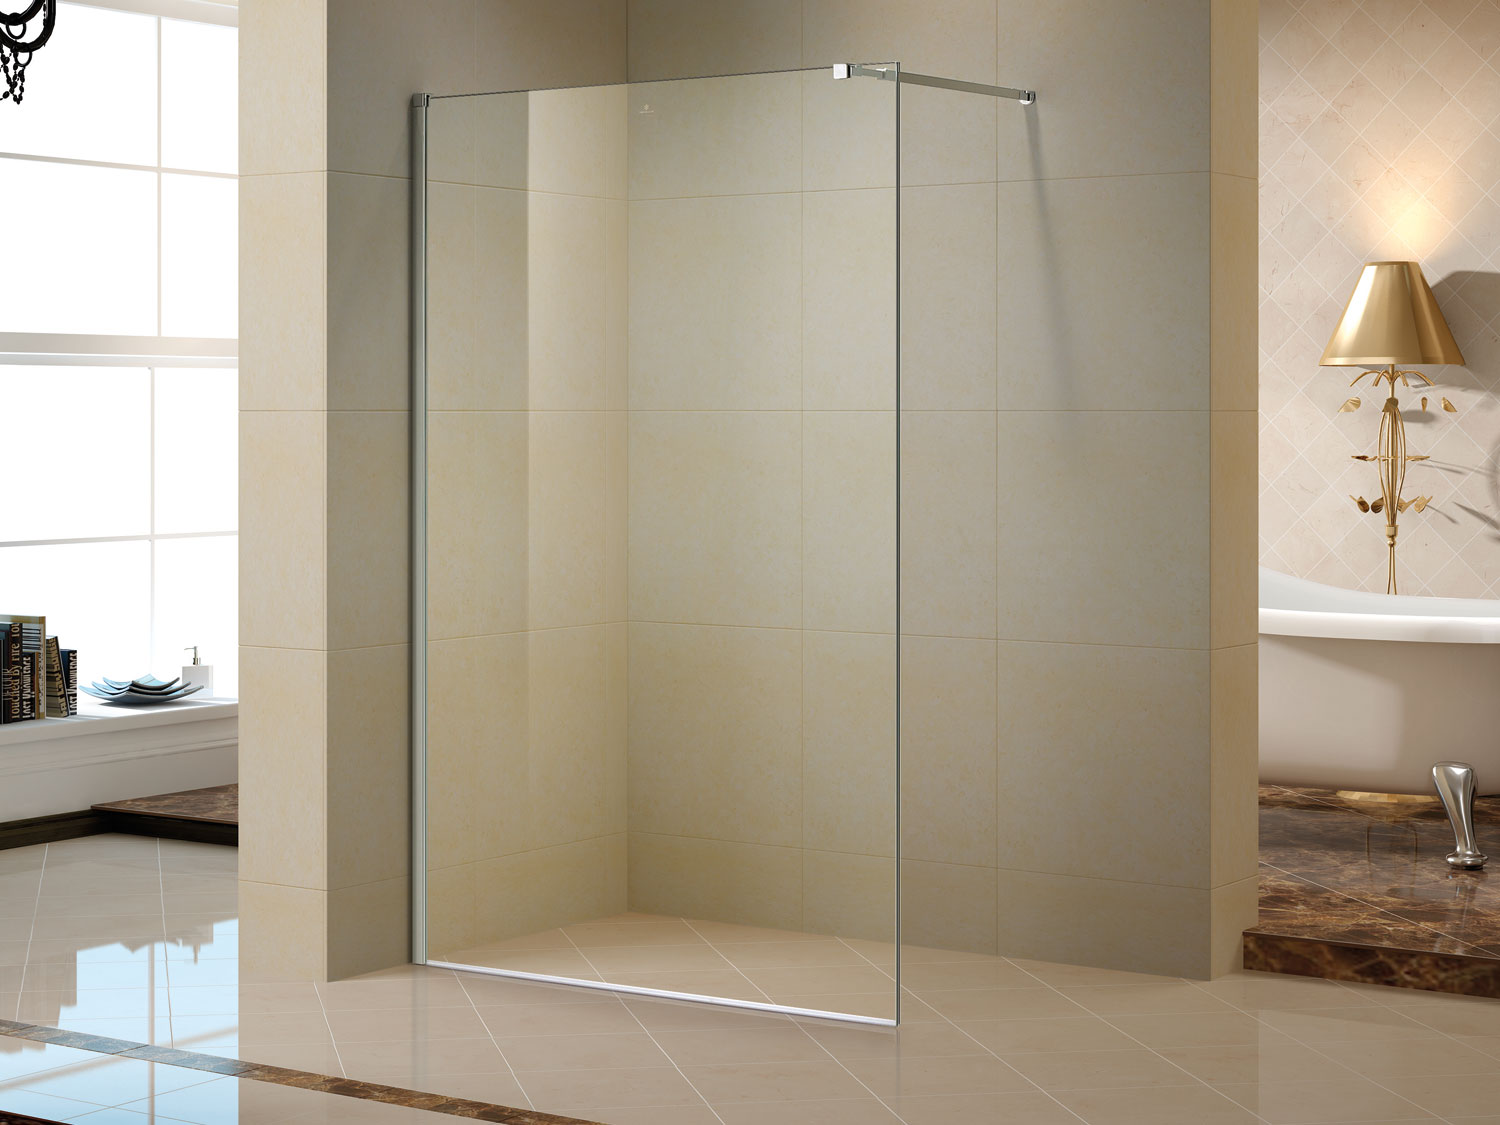 This walk-in shower screen 1000mm 